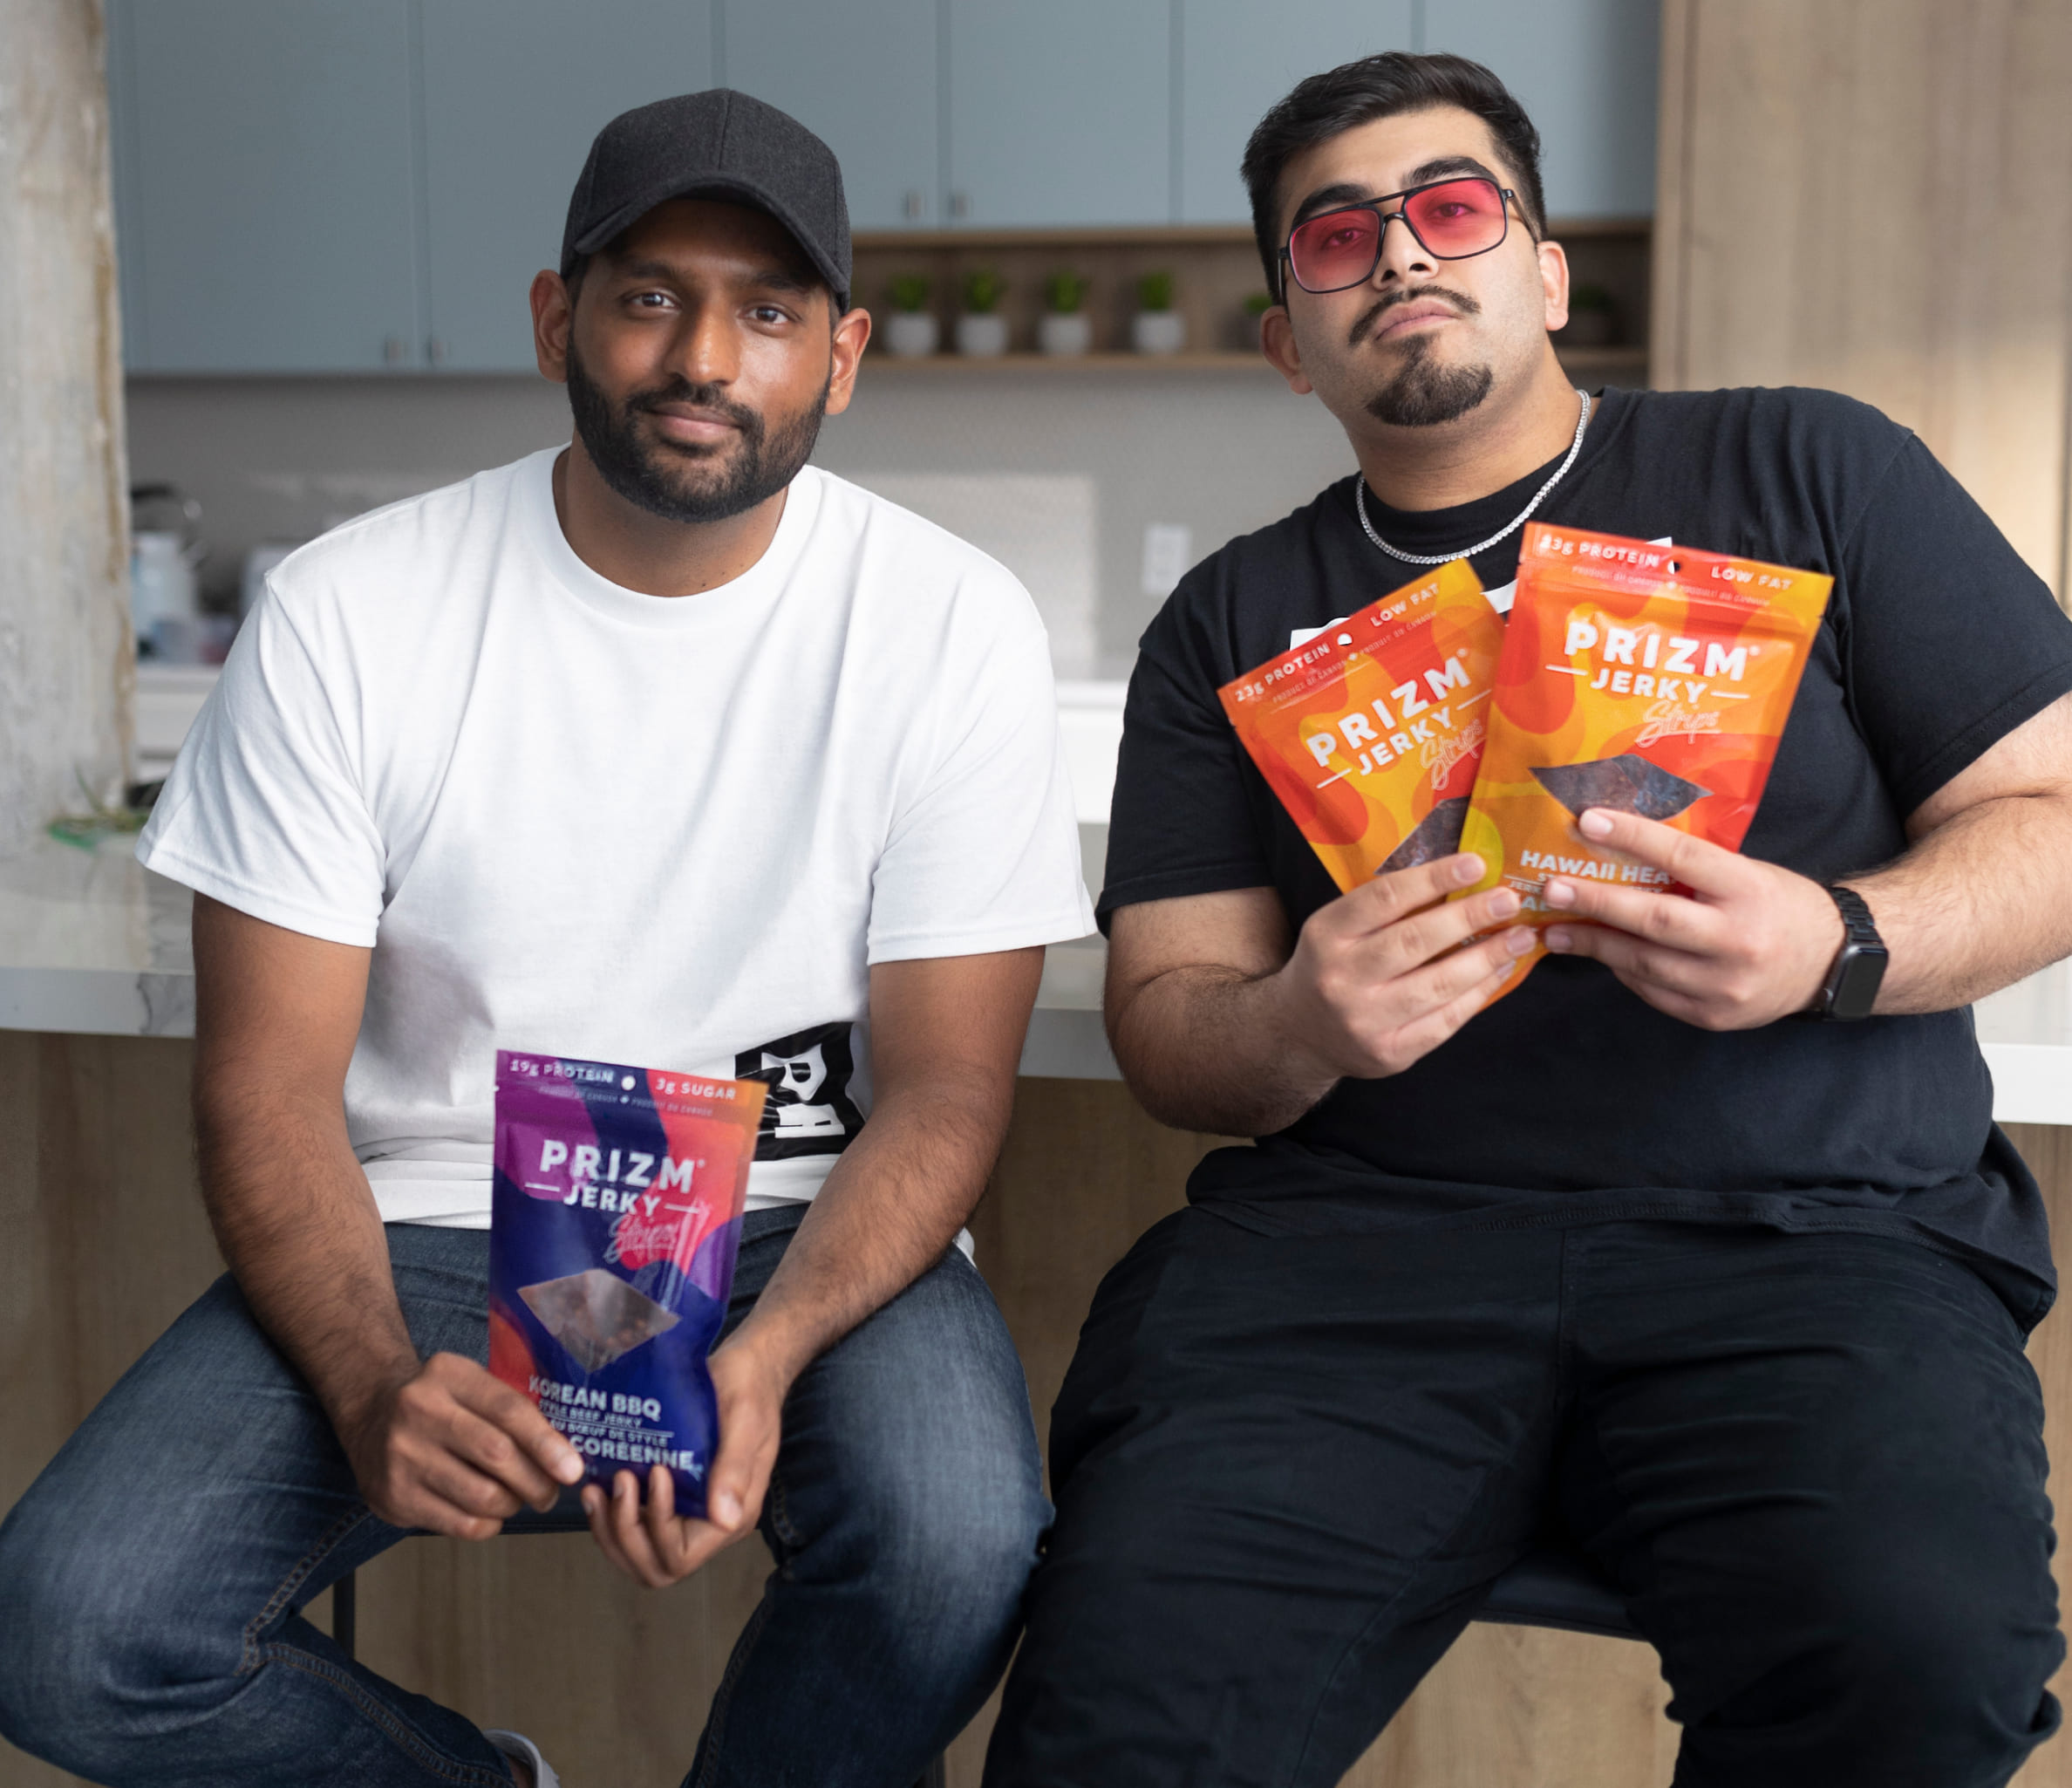 Shaan and Humza of Prizm Foods sit on stools in front of a kitchen island holding purple and orange bags of their jerky.